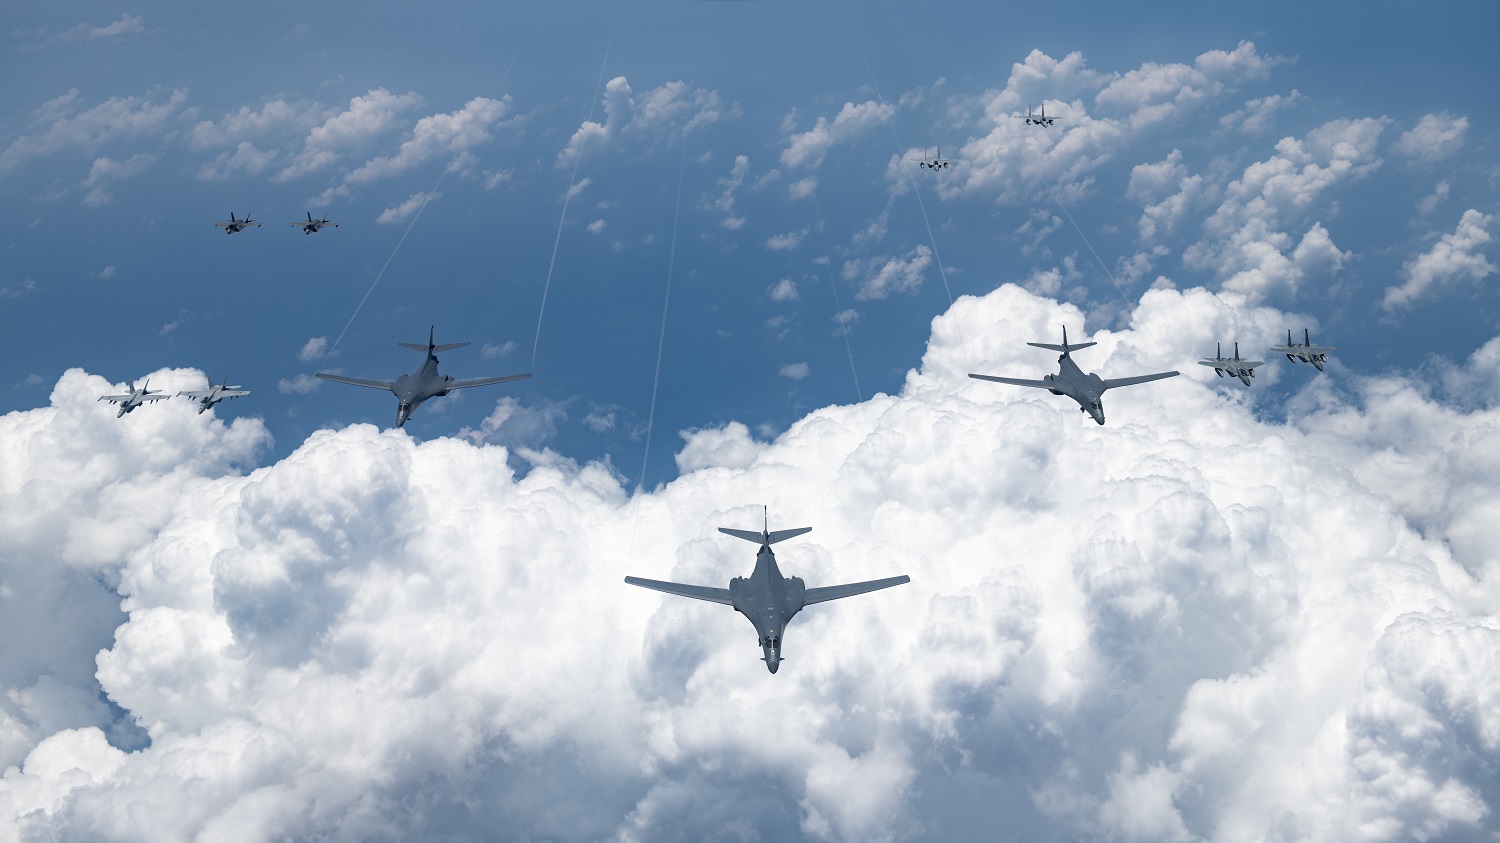 U.S. Air Force, Navy, Marine Corps and Japan Air Self Defense Force aircraft conduct a large-scale joint and bilateral integration training exercise Aug. 18, 2020. Four B-1B Lancers, two B-2 Spirit Stealth Bombers, and four F-15C Eagles conducted Bomber Task Force missions simultaneously within the Indo-Pacific region over the course of 24 hours. Pacific Air Forces routinely conducts BTF operations to show the United States' commitment to allies and partners in the Indo-Pacific area of responsibility.